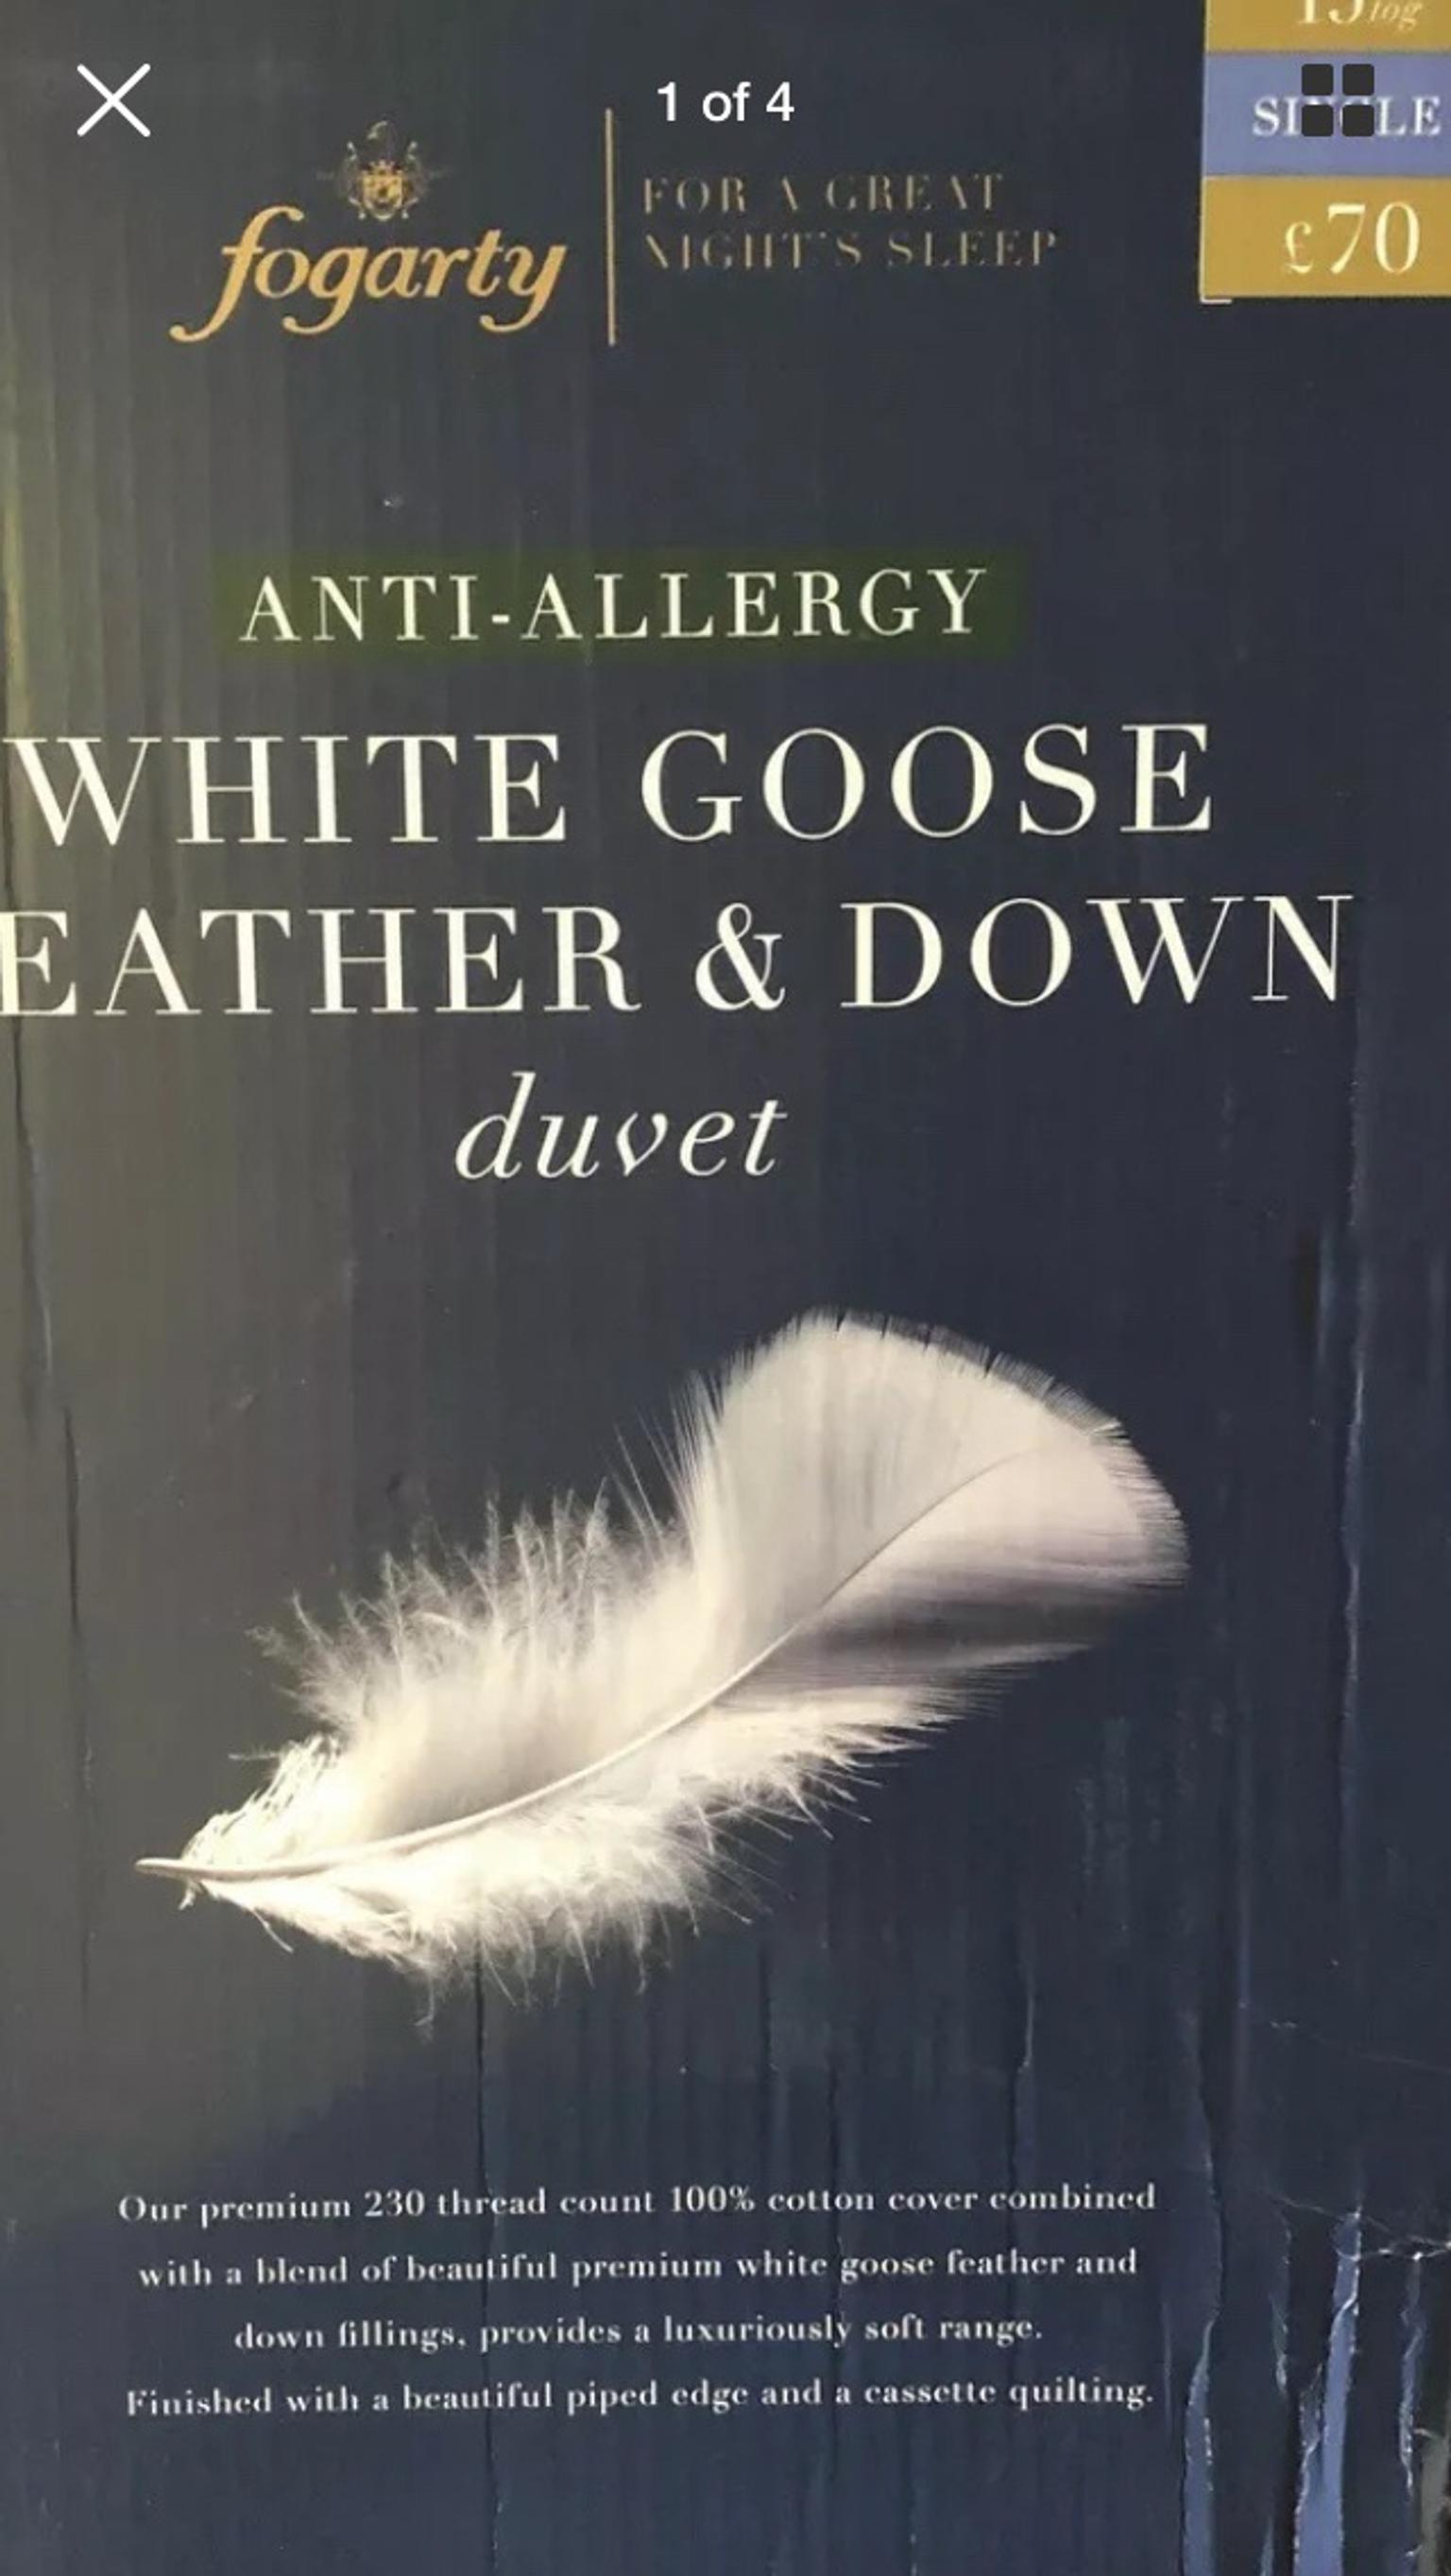 Goose Feather Down Fogarty Single Duvet Quilt In South